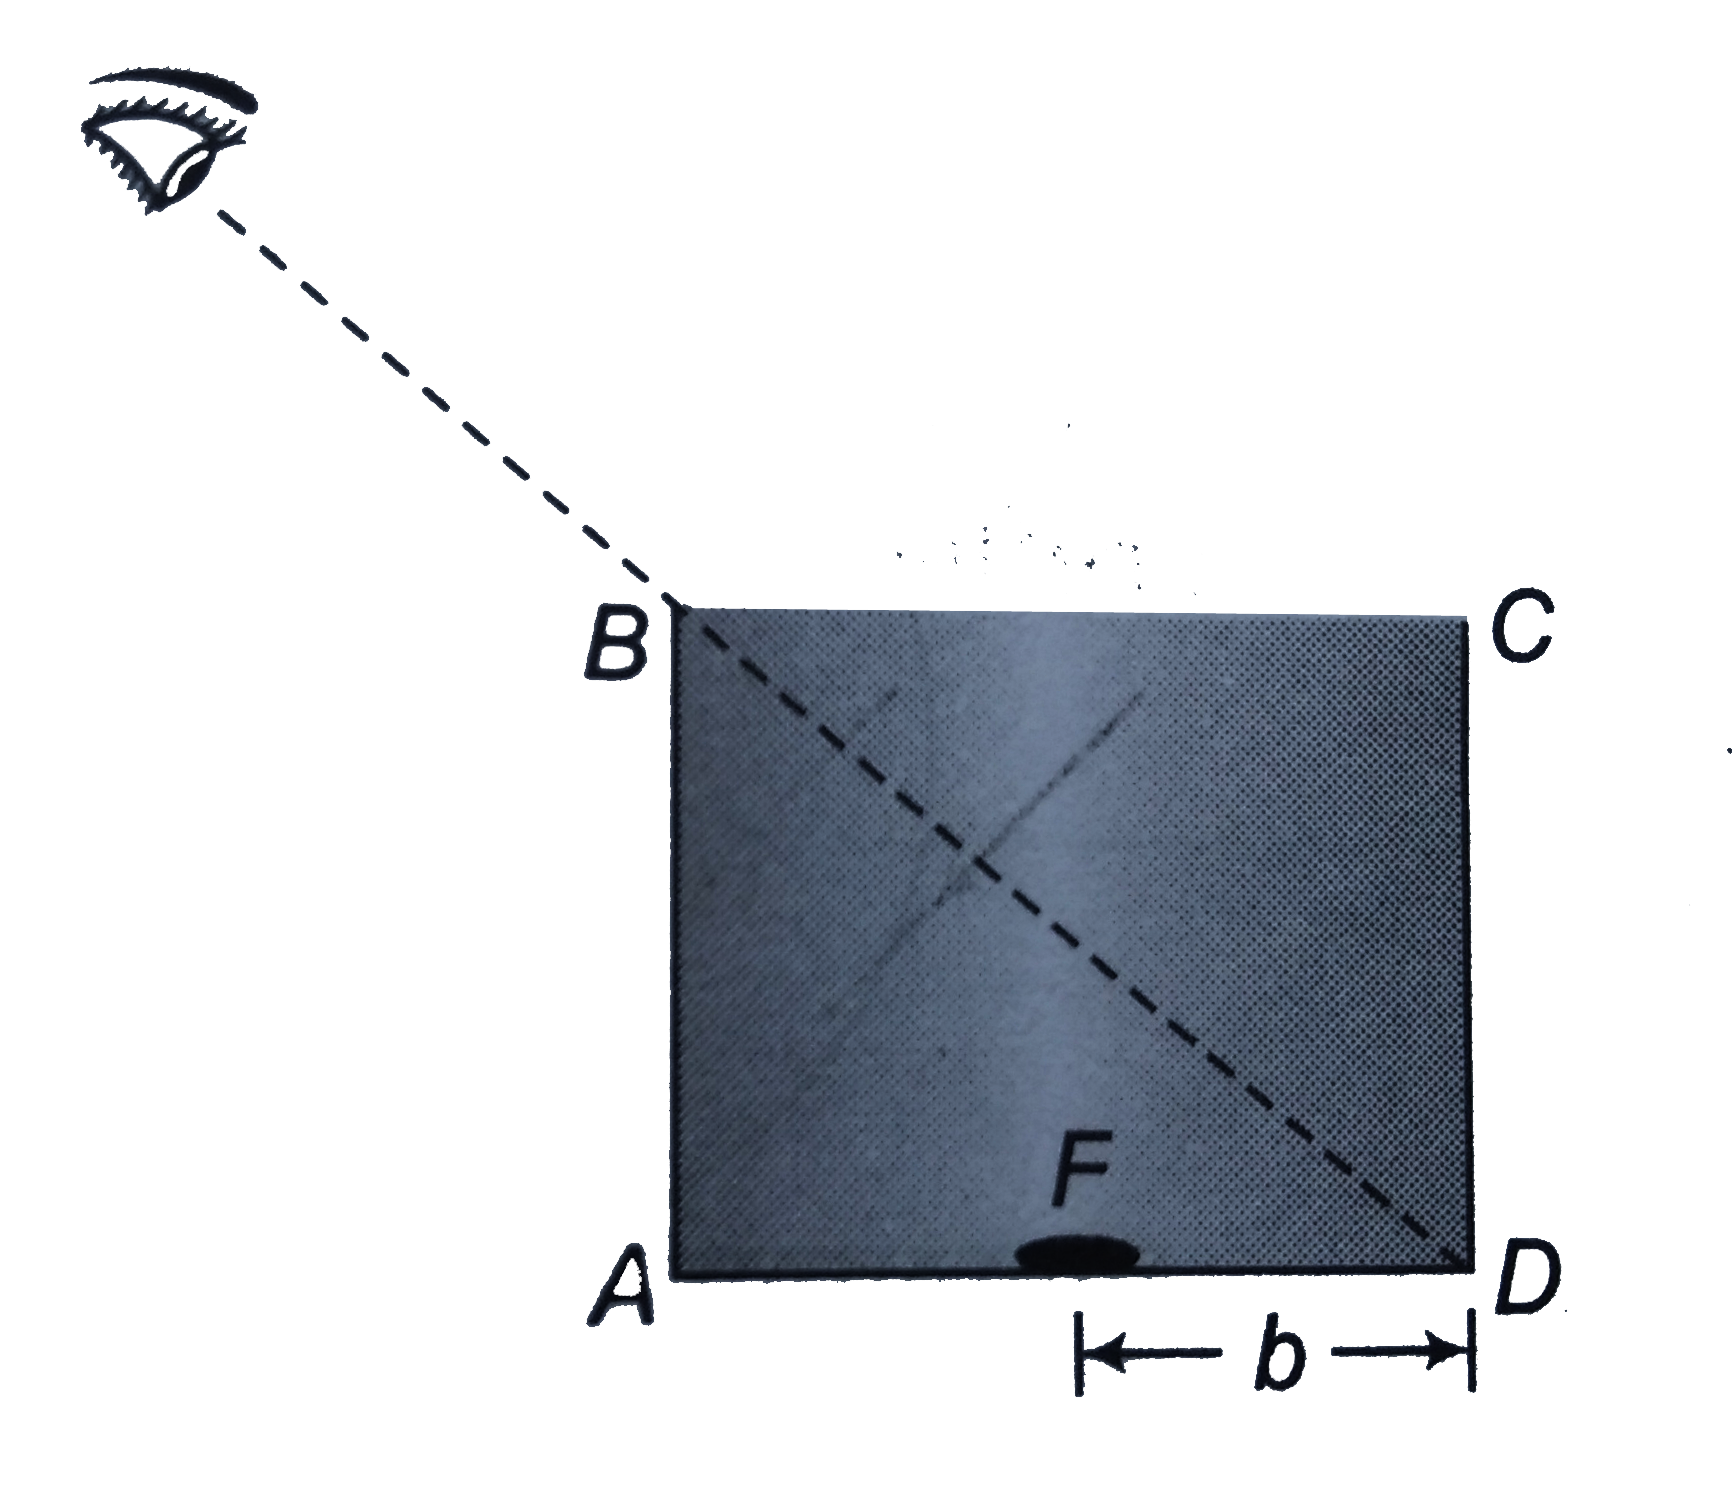 A cubical vessel with non-transparent walls is so located that the eye of an observer does not see its bottom but sees all of the wall CD.   To what height should water be poured into the vessel for the observer to see an object F arranged at a distance of b=10 cm from corner D? The face of the vessel is a=40 cm.  Refractive index of water is 4/3.